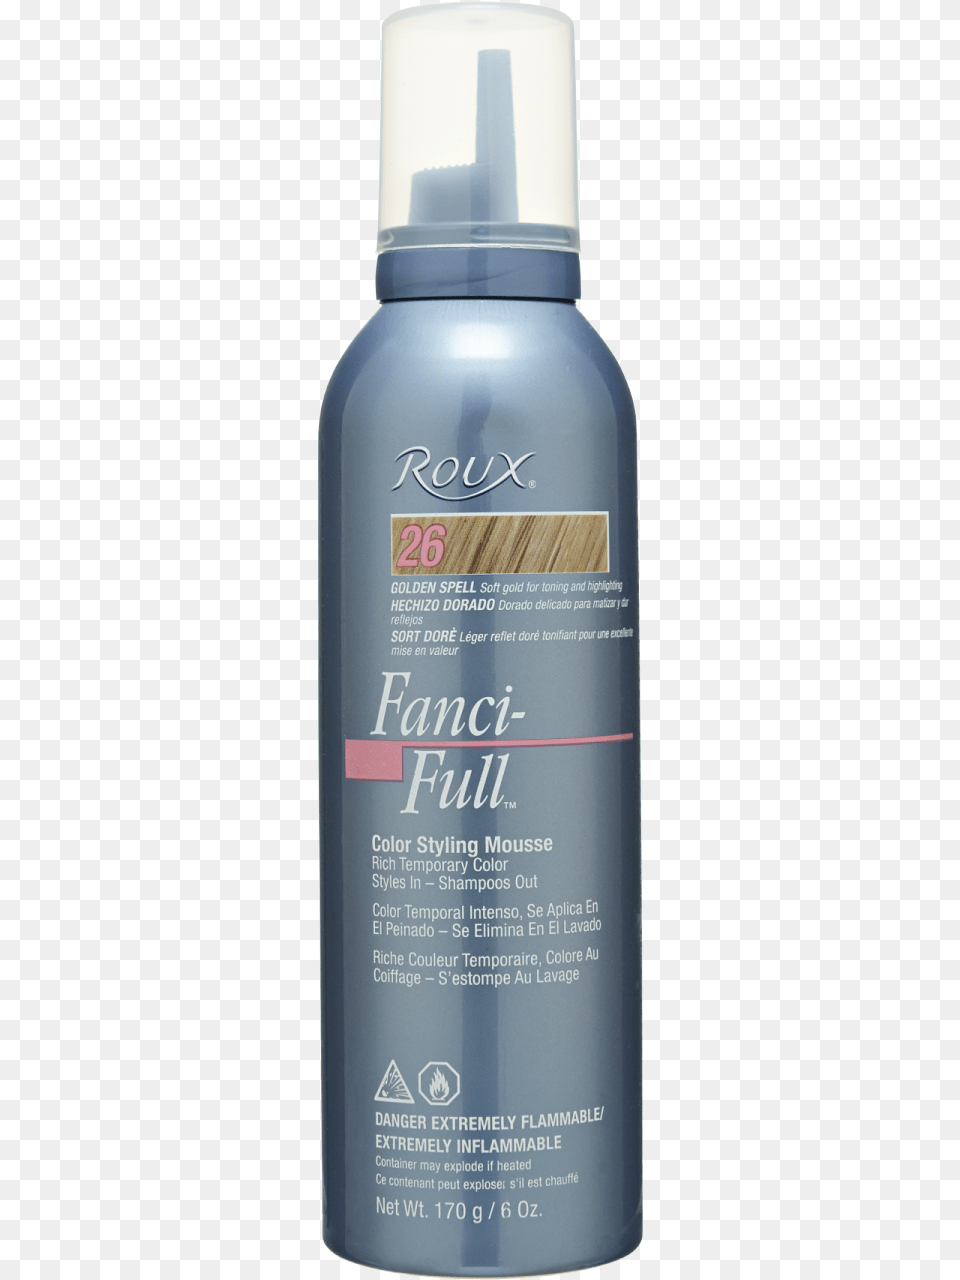 Fanci Full Temporary Hair Color Mousse By Roux Shaving Cream, Cosmetics, Bottle, Shaker Png Image